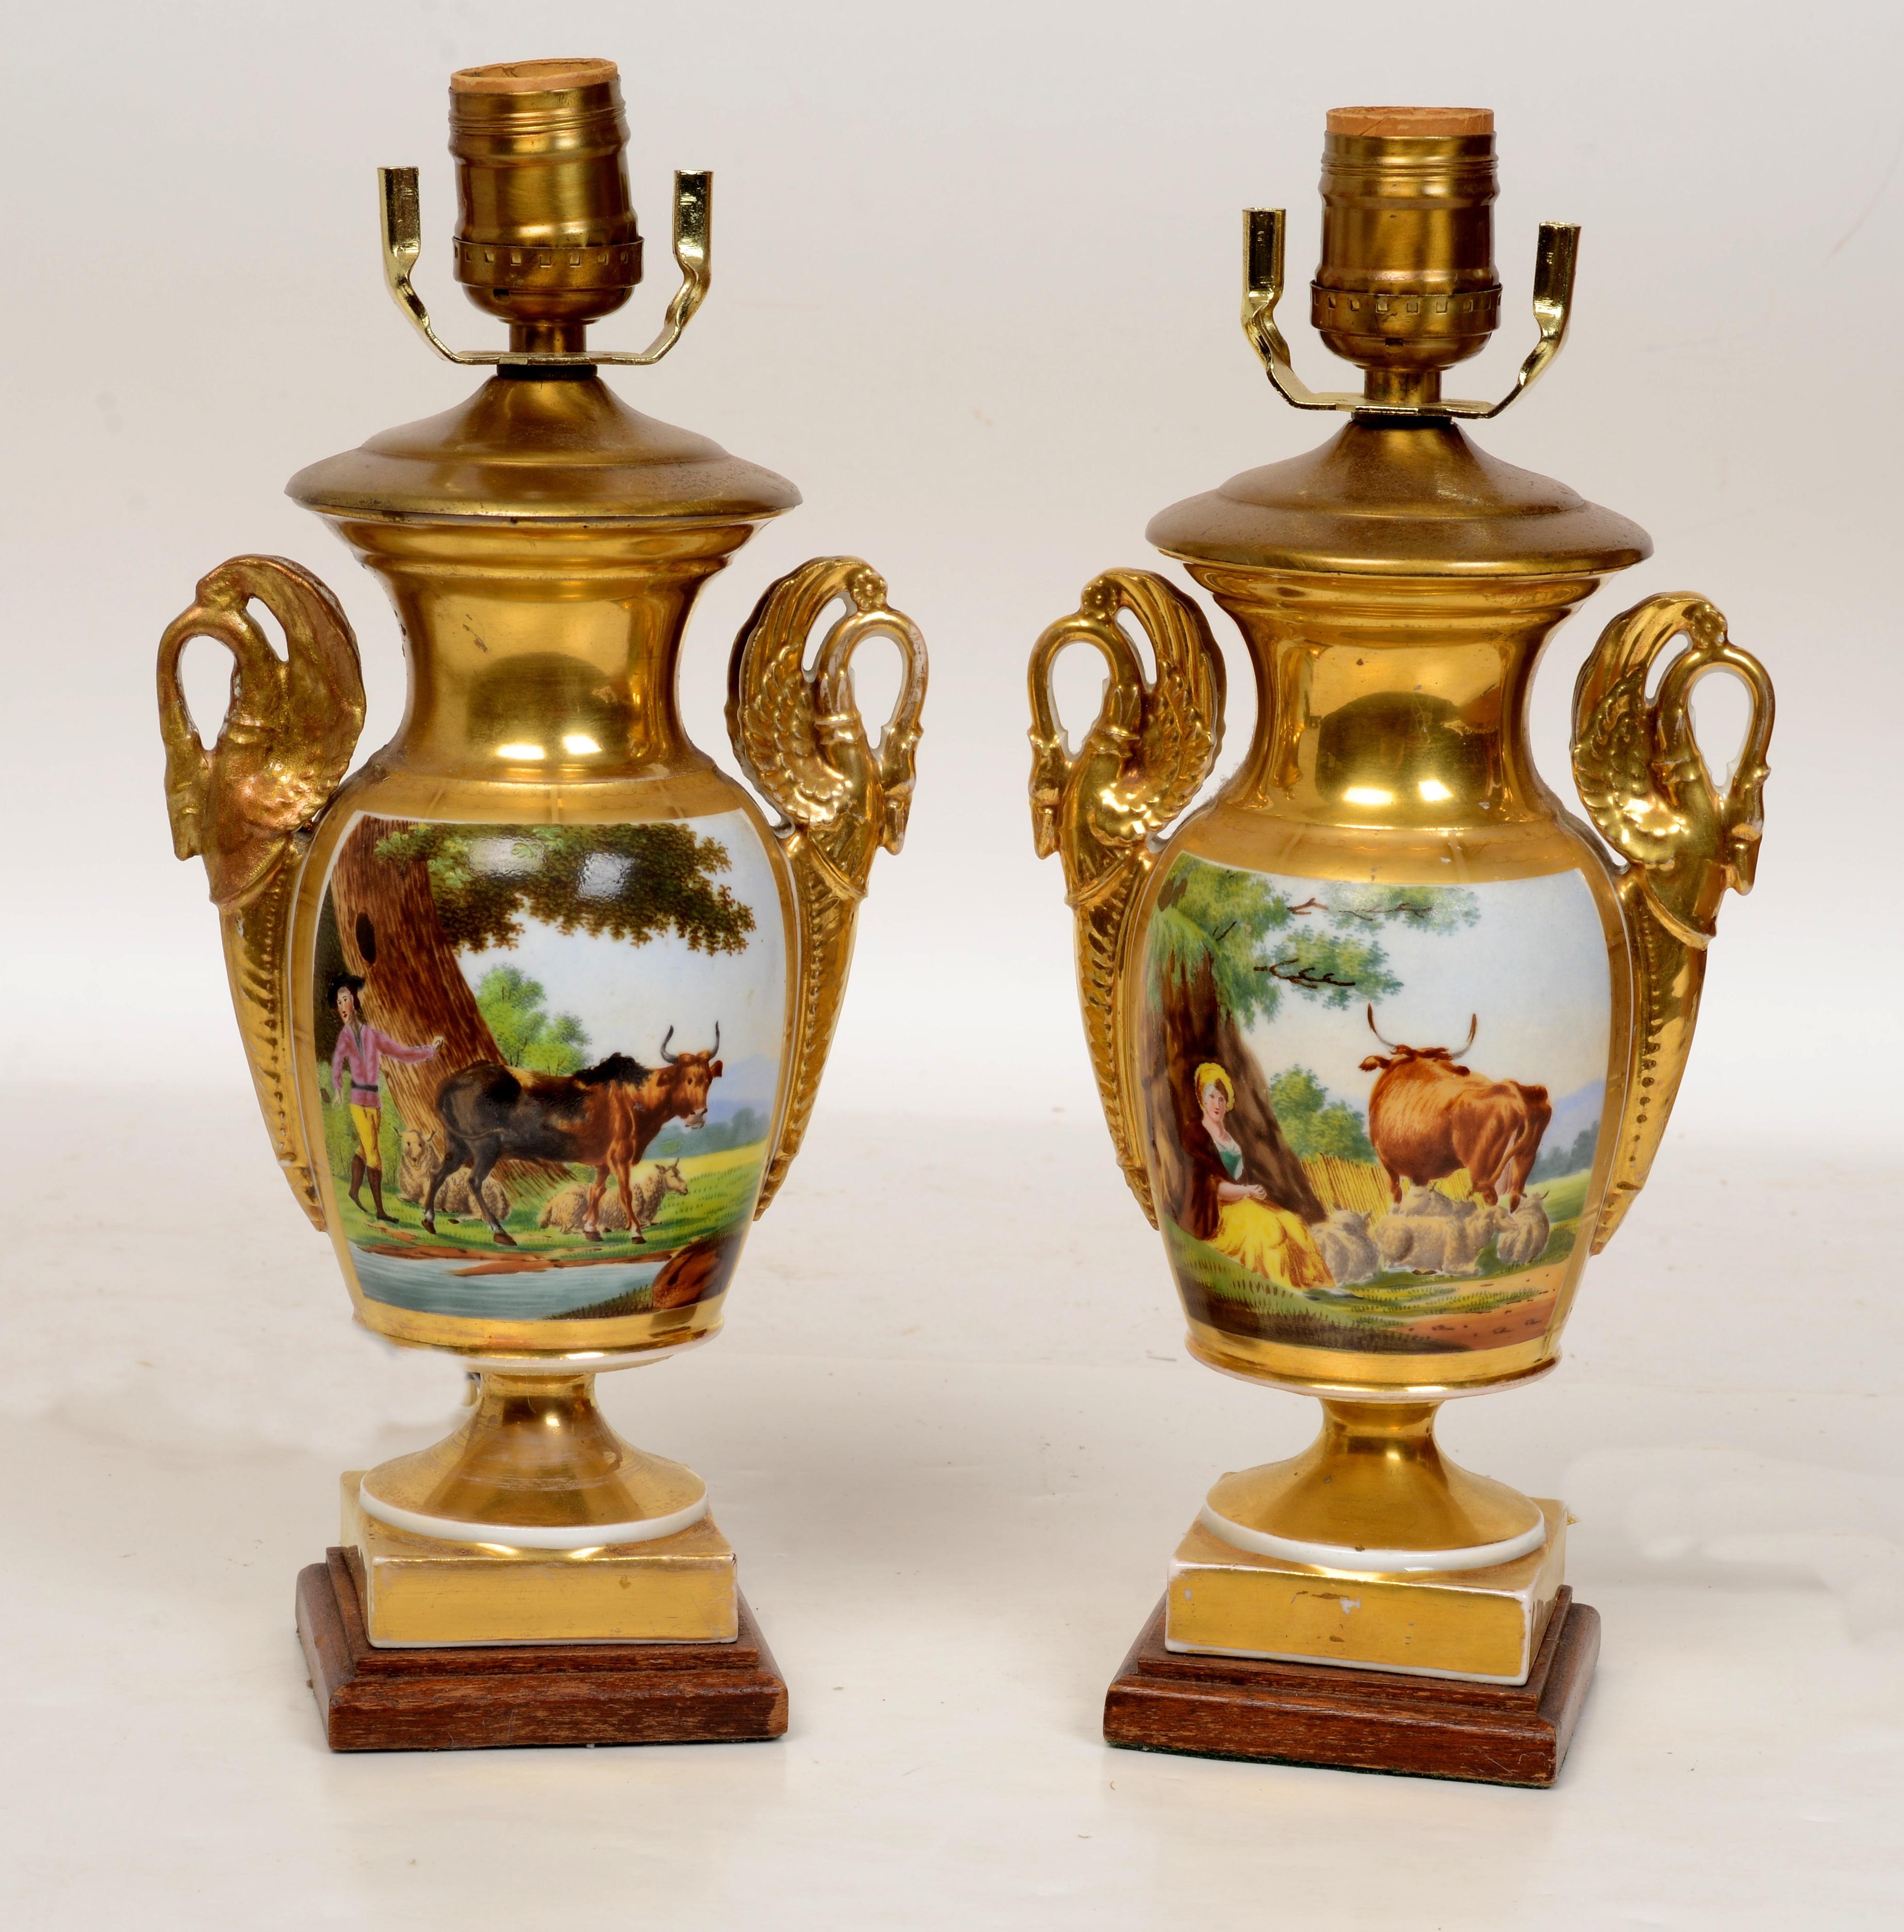 Pr of French Old Paris or Vieux Paris urns now converted into table lamps c1810. Old Paris porcelain or Vieux Paris is very broadly defined as porcelain made by artisans in and around Paris from the late 18th century to the 1870’s. It was produced